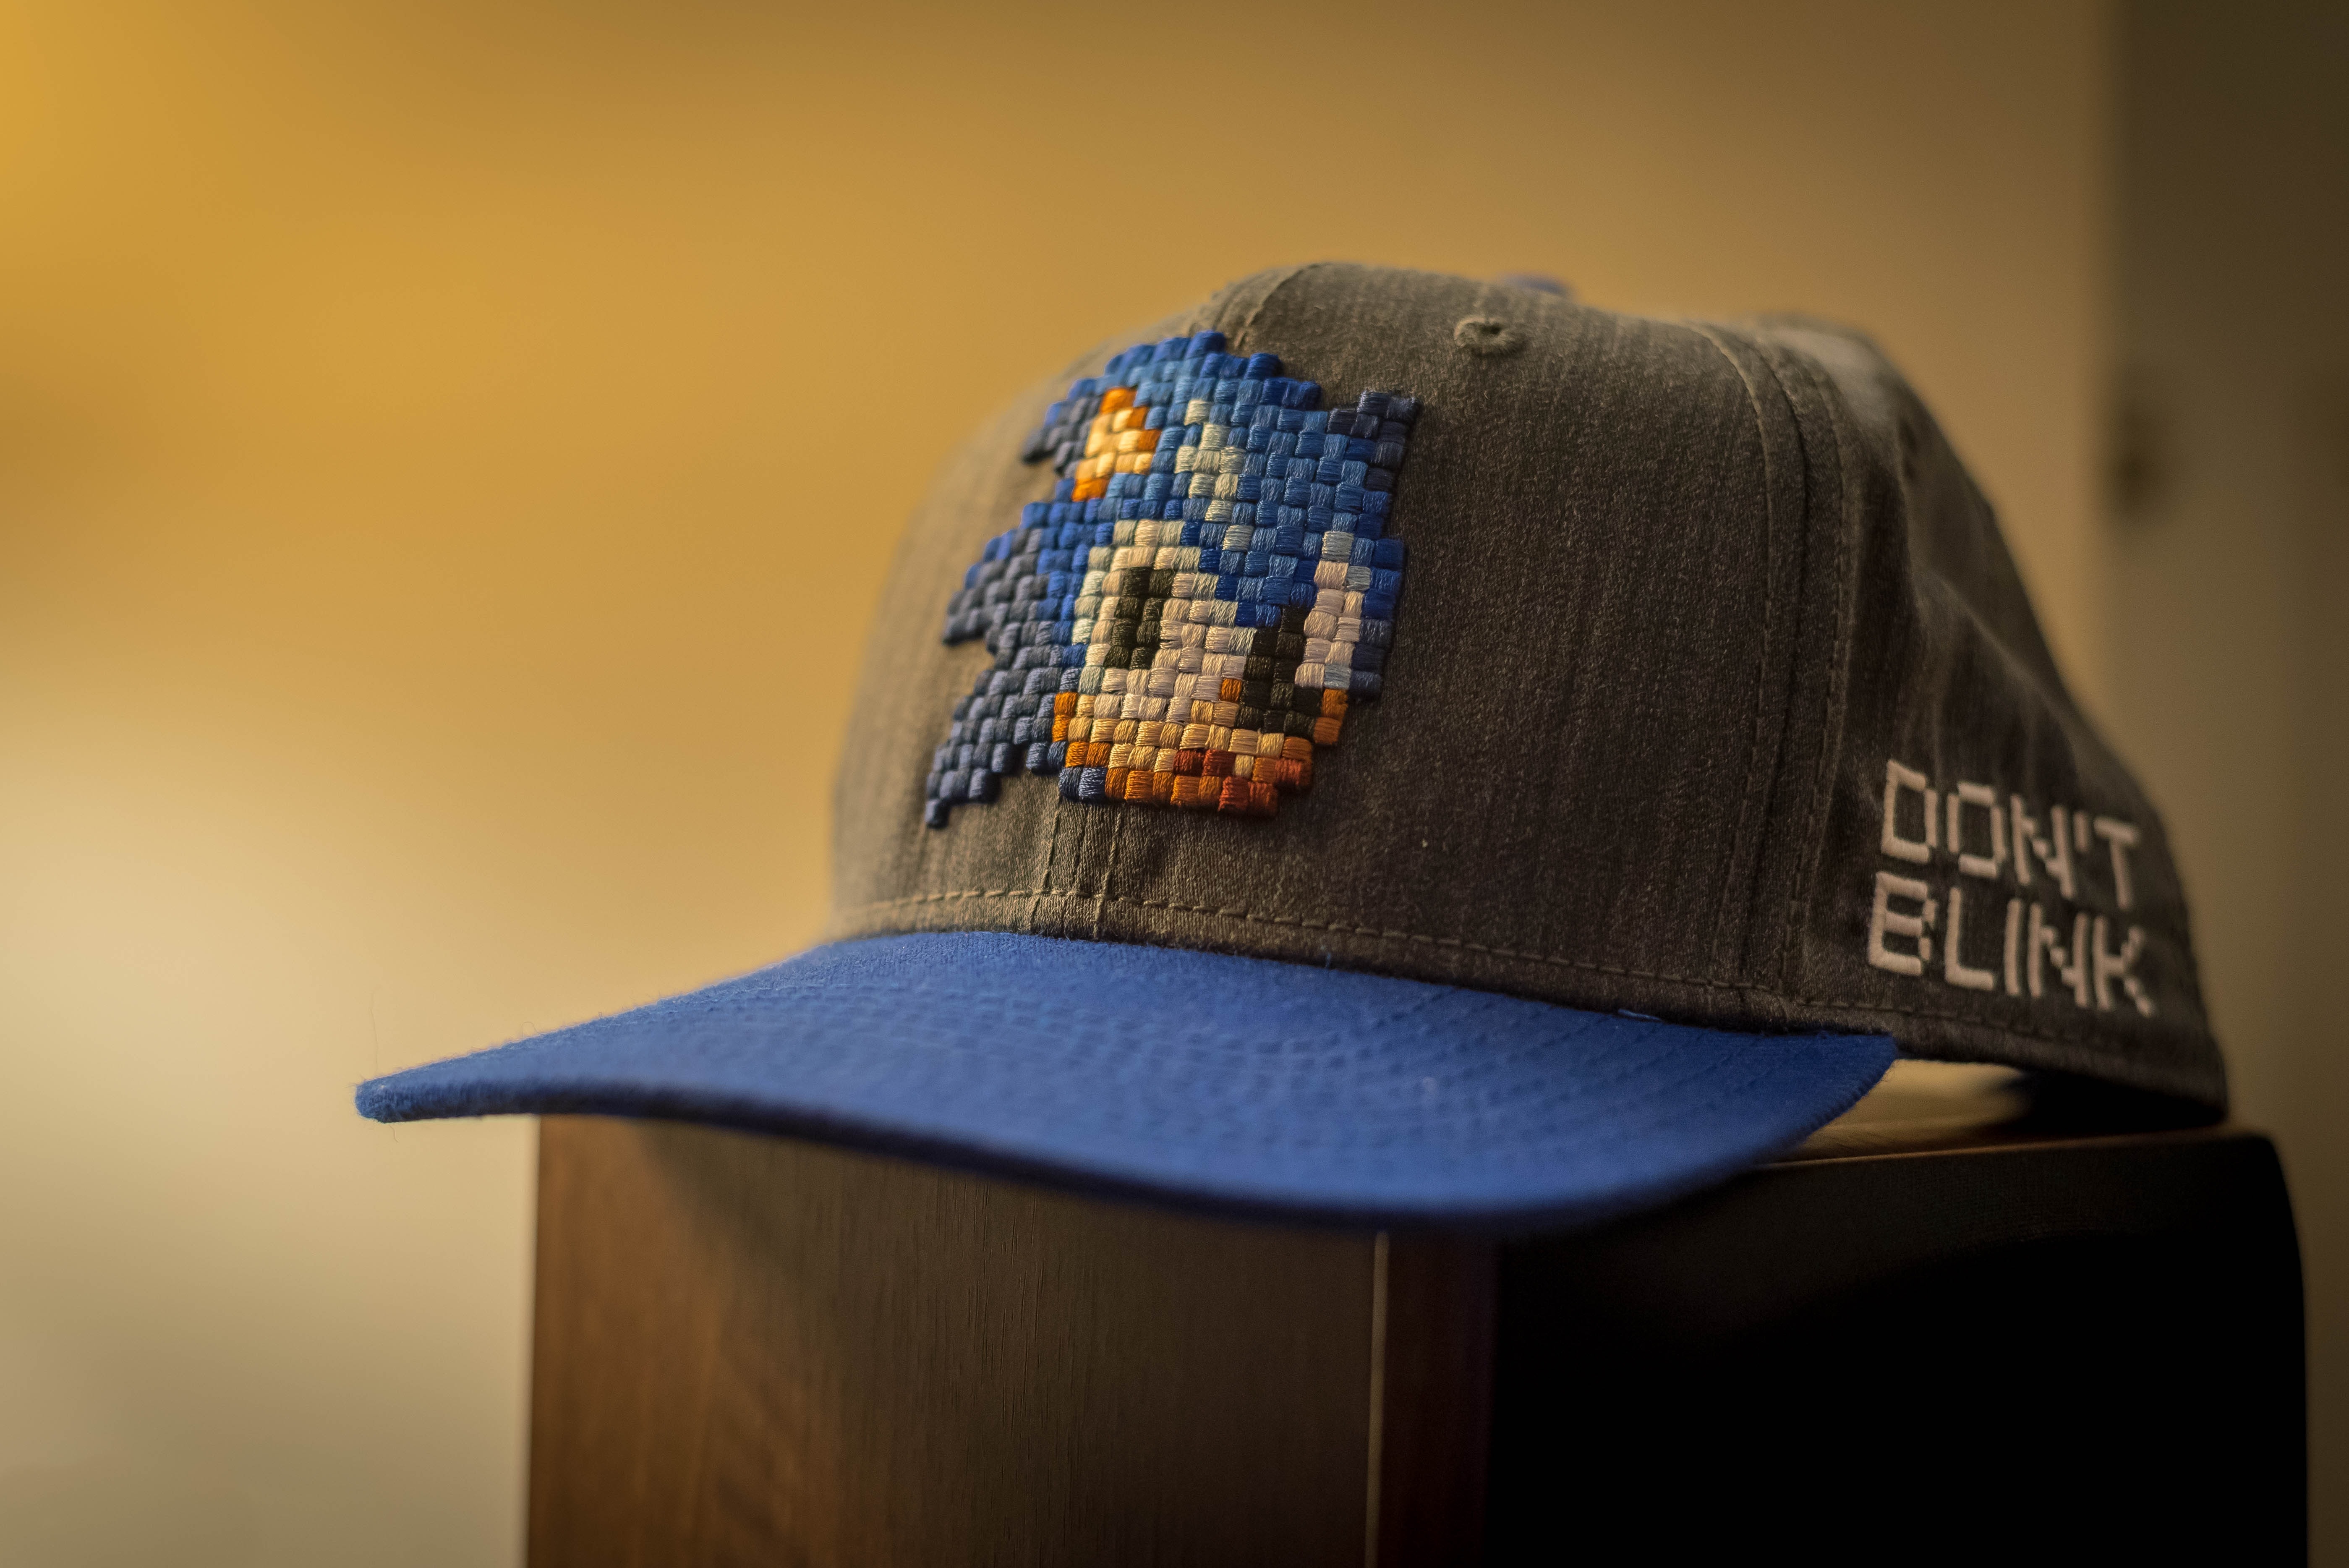 sonic gray and blue snapback cap